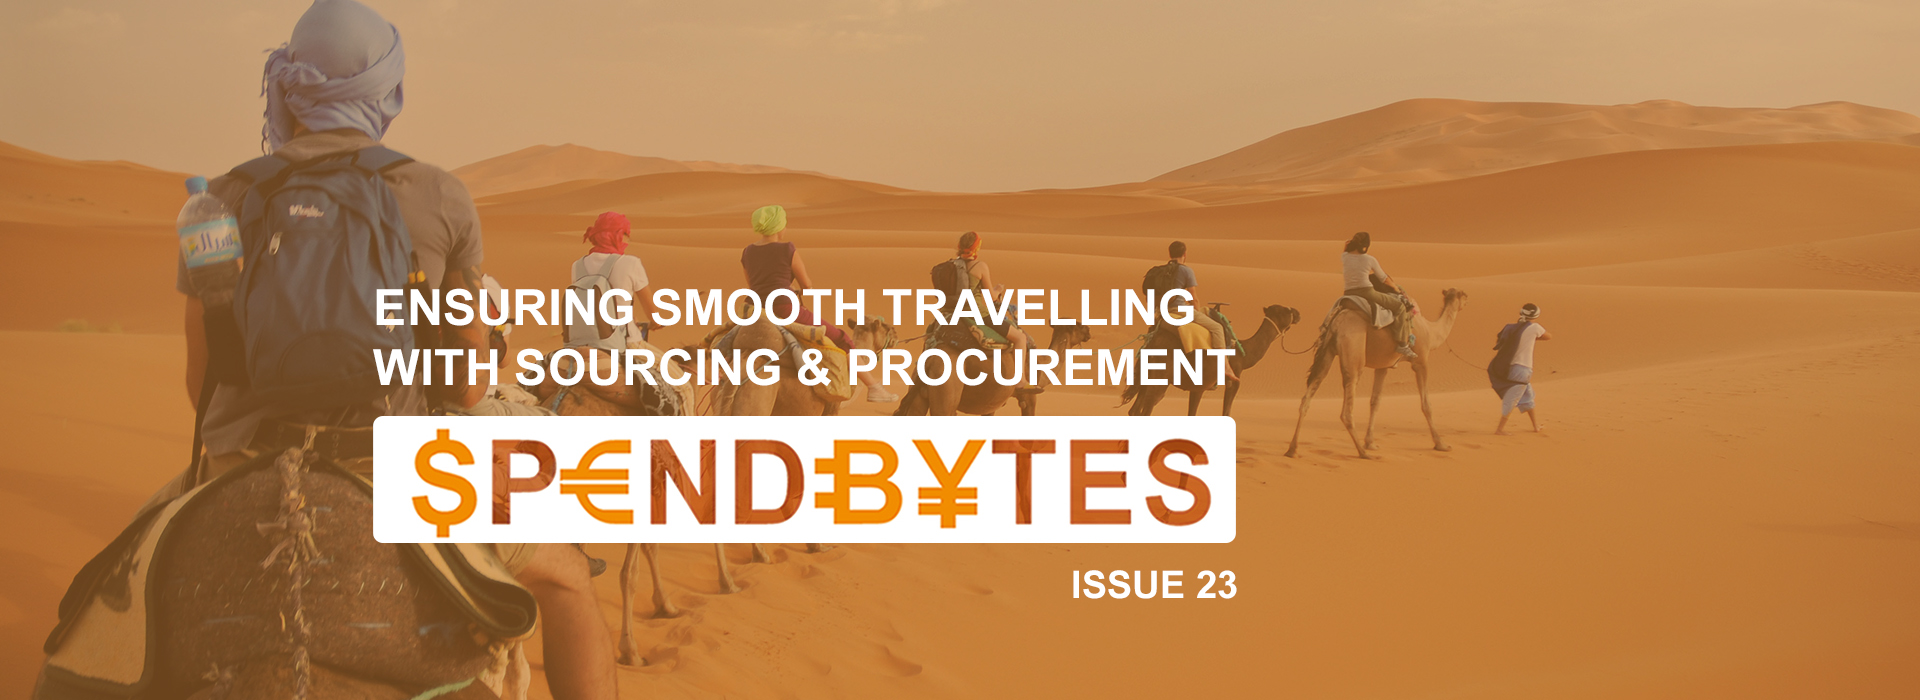 Sourcing and Procurement for Travel Program - SpendBytes Issue 23